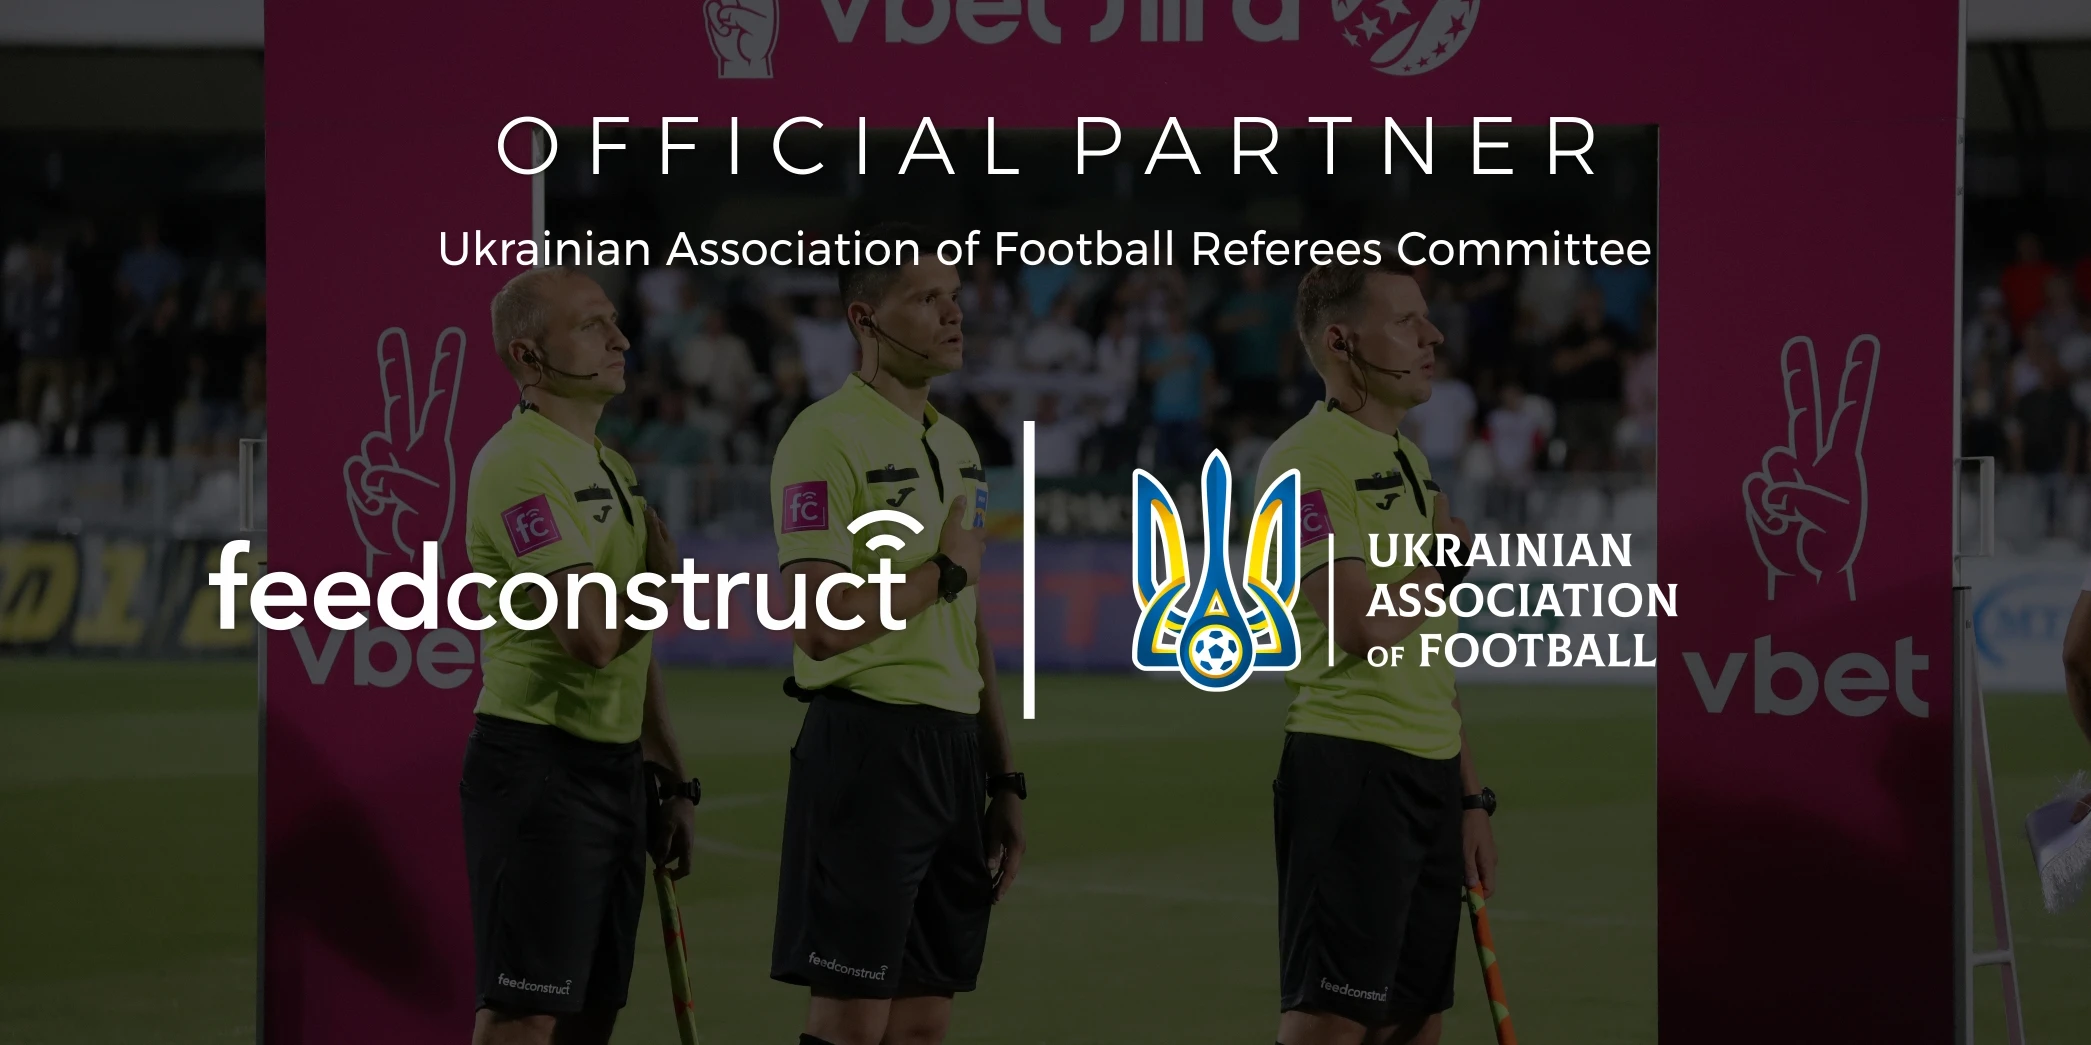 FeedConstruct - The Official Partner of the Ukrainian Association of Football Referees Committee